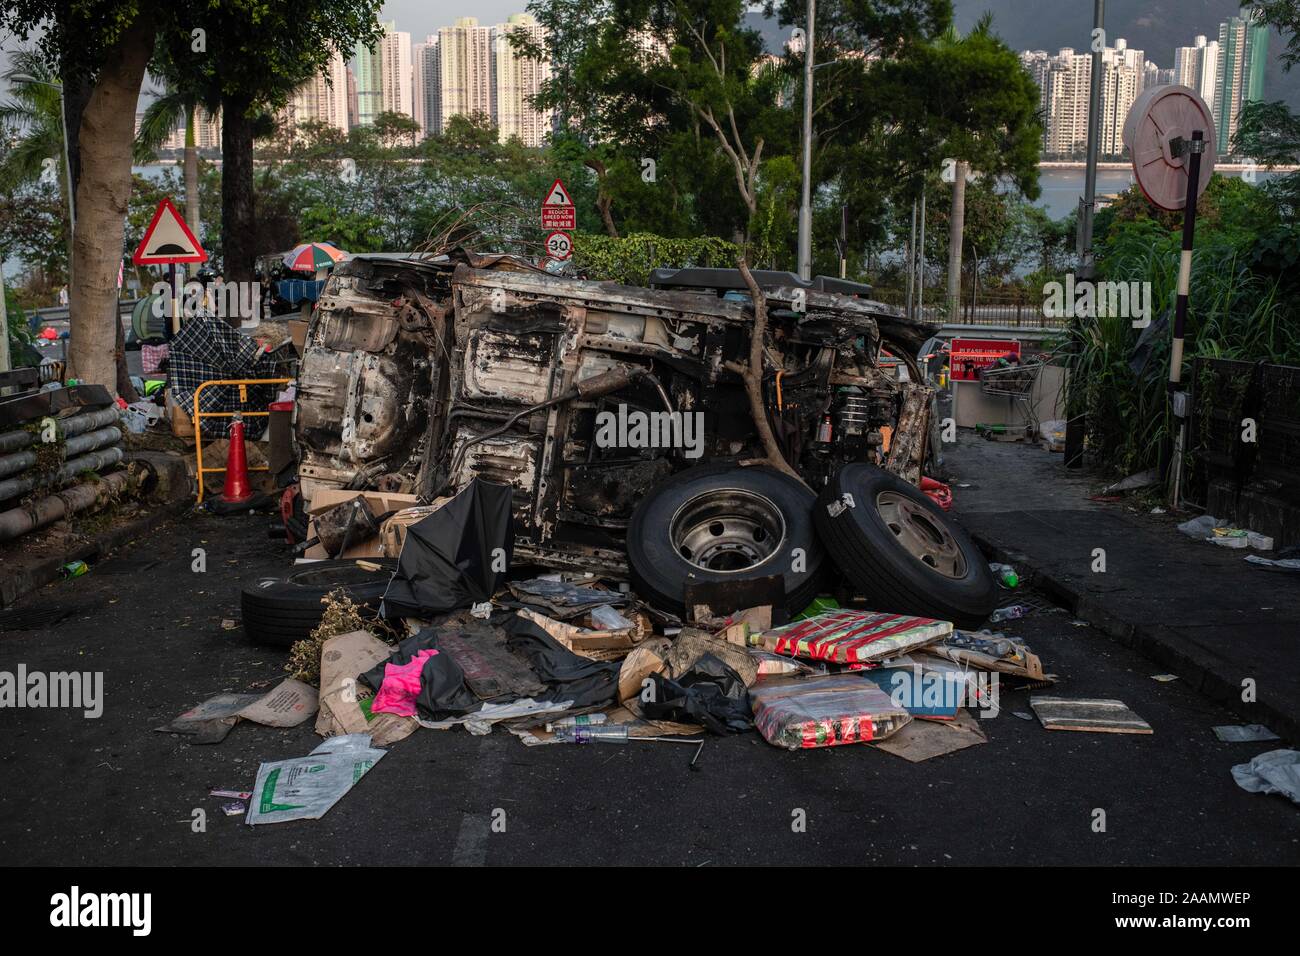 A burned vehicle blocks the entrance to bridge number 2 during the demonstration.After a week of strikes and clashes with police, protesters still occupy the campus of Chinese University of Hong Kong in a day of relative calm. At the end of the day, protesters blocked again Tolo Highway in flash mob actions and then evacuated the campus helped by private drivers after setting the entrance of bridge number 2 on fire. No arrests were made. Stock Photo